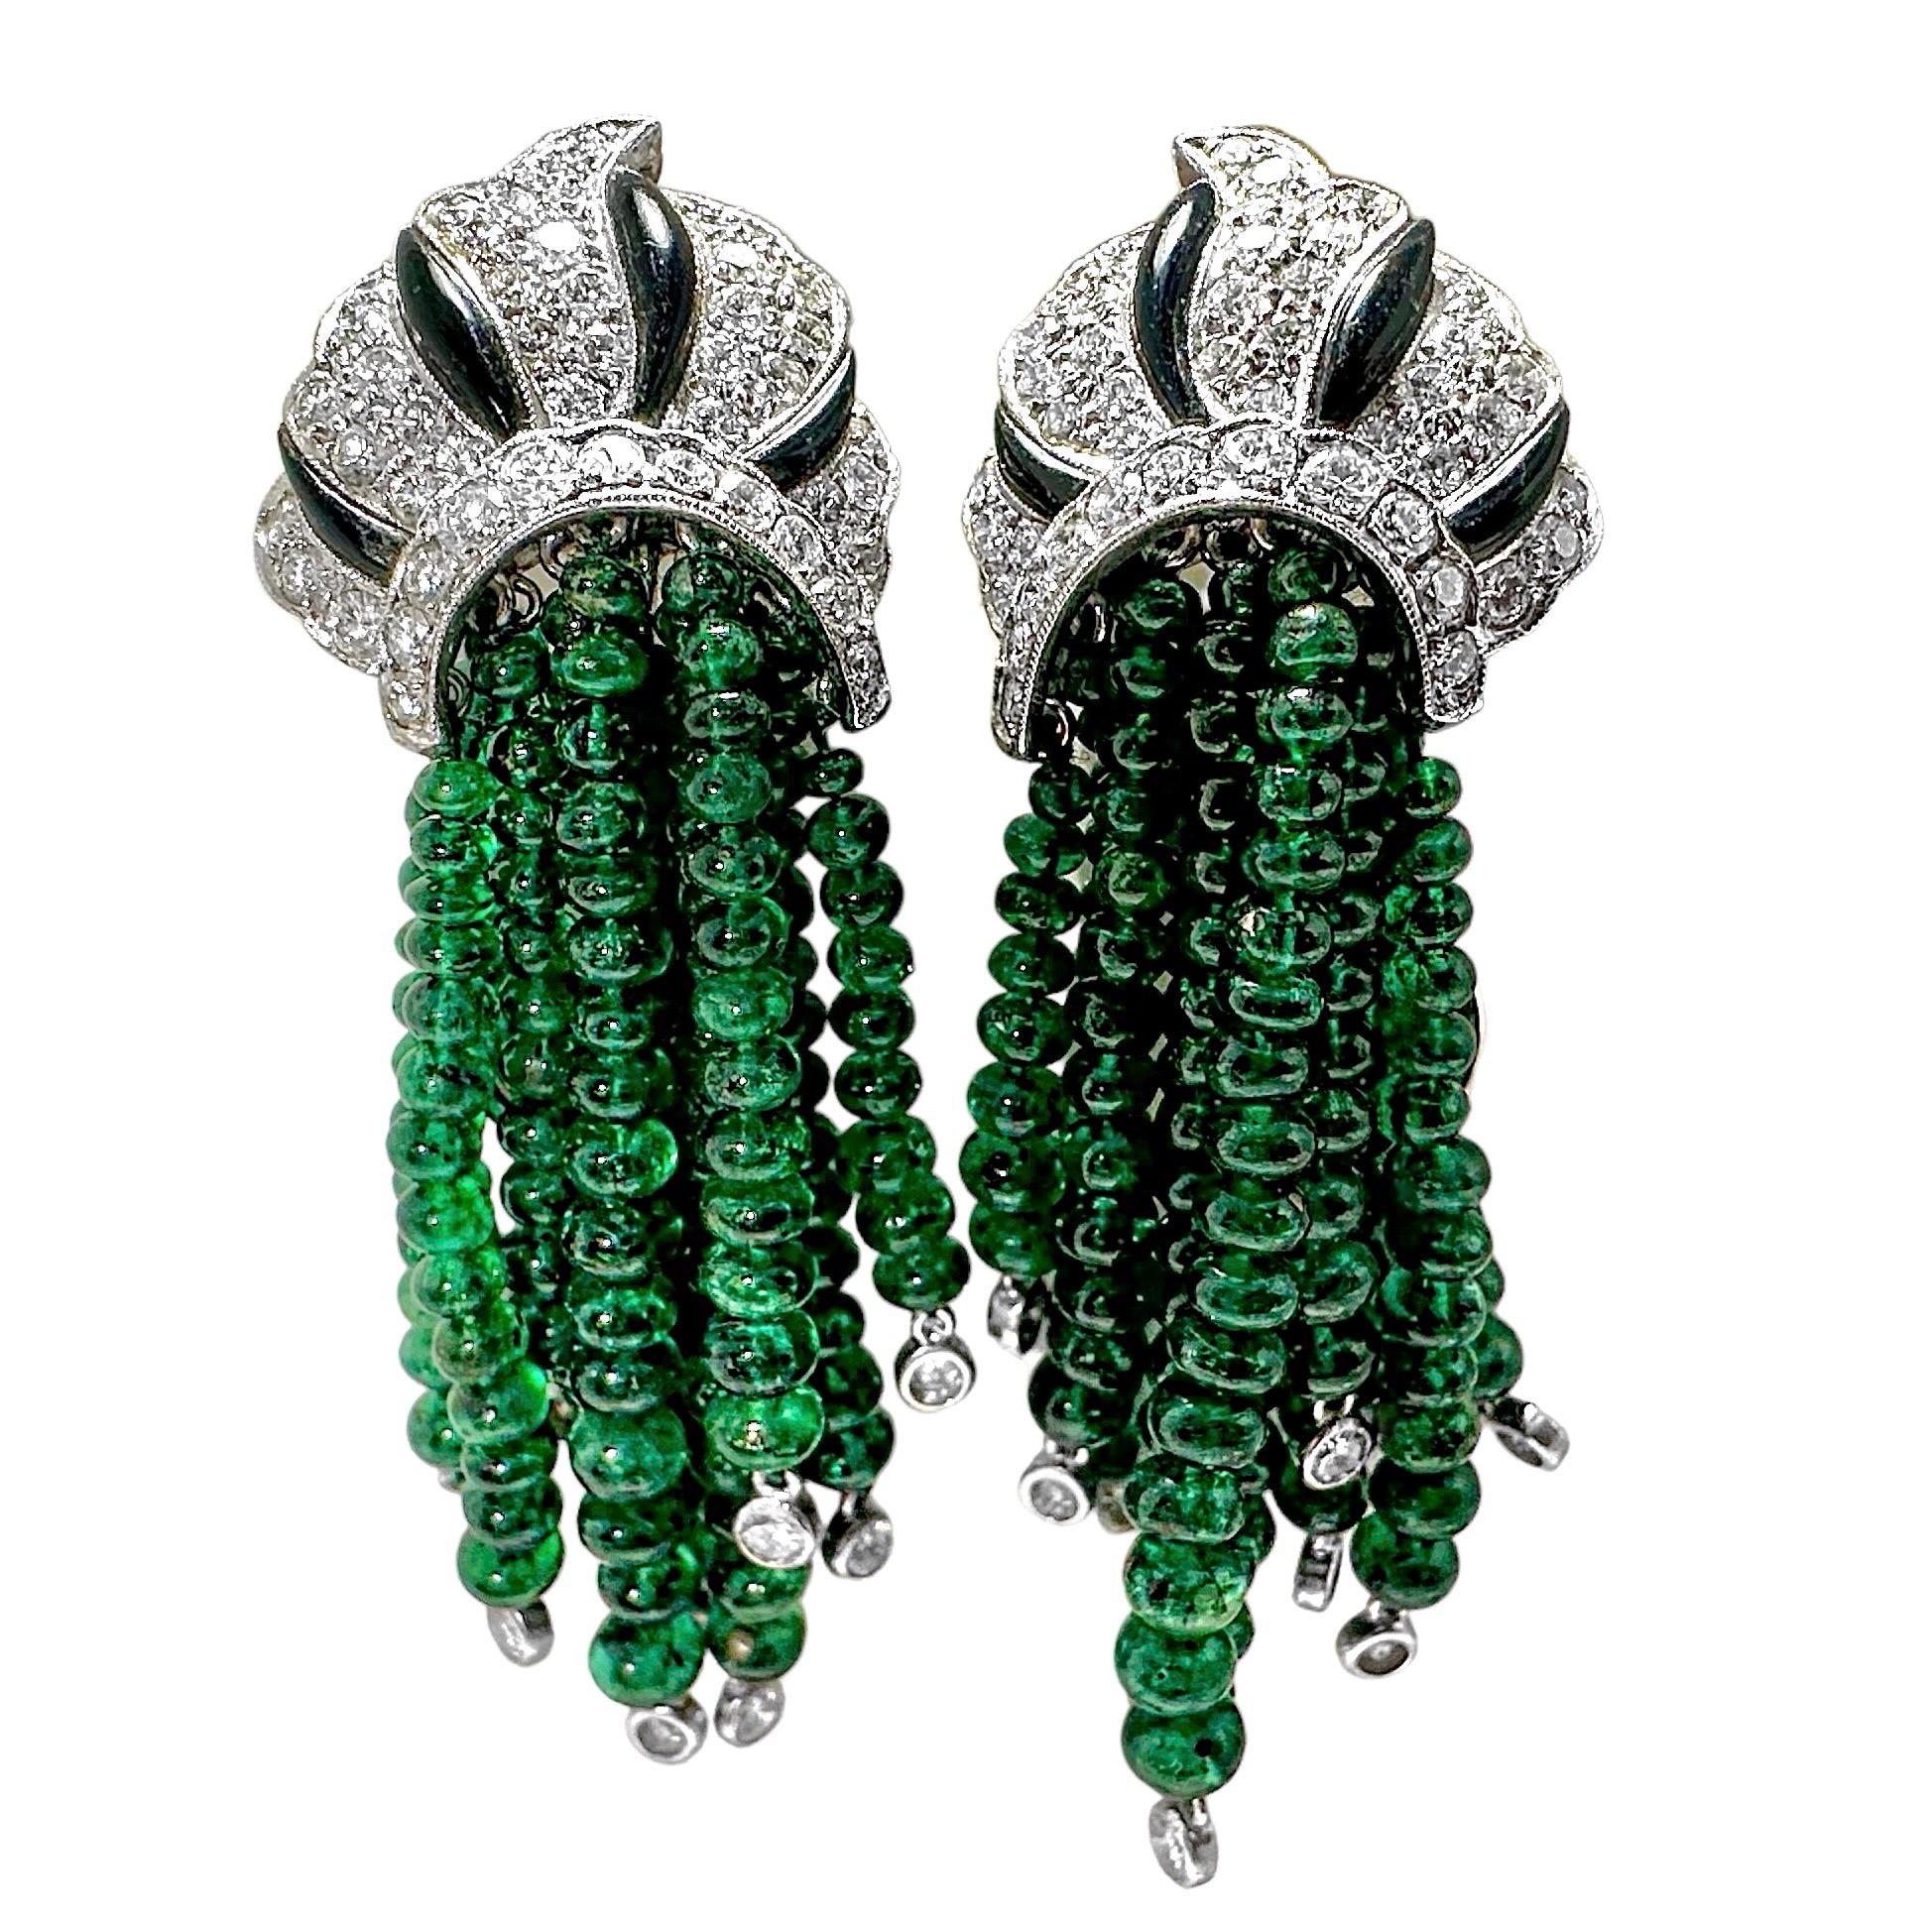 A pair of antique style earrings in white gold featuring hanging, strands of emerald beads. Each strand terminates in a bezel set round brilliant cut diamond. The tops of the earrings have a royal appearance, with assorted round brilliant cut